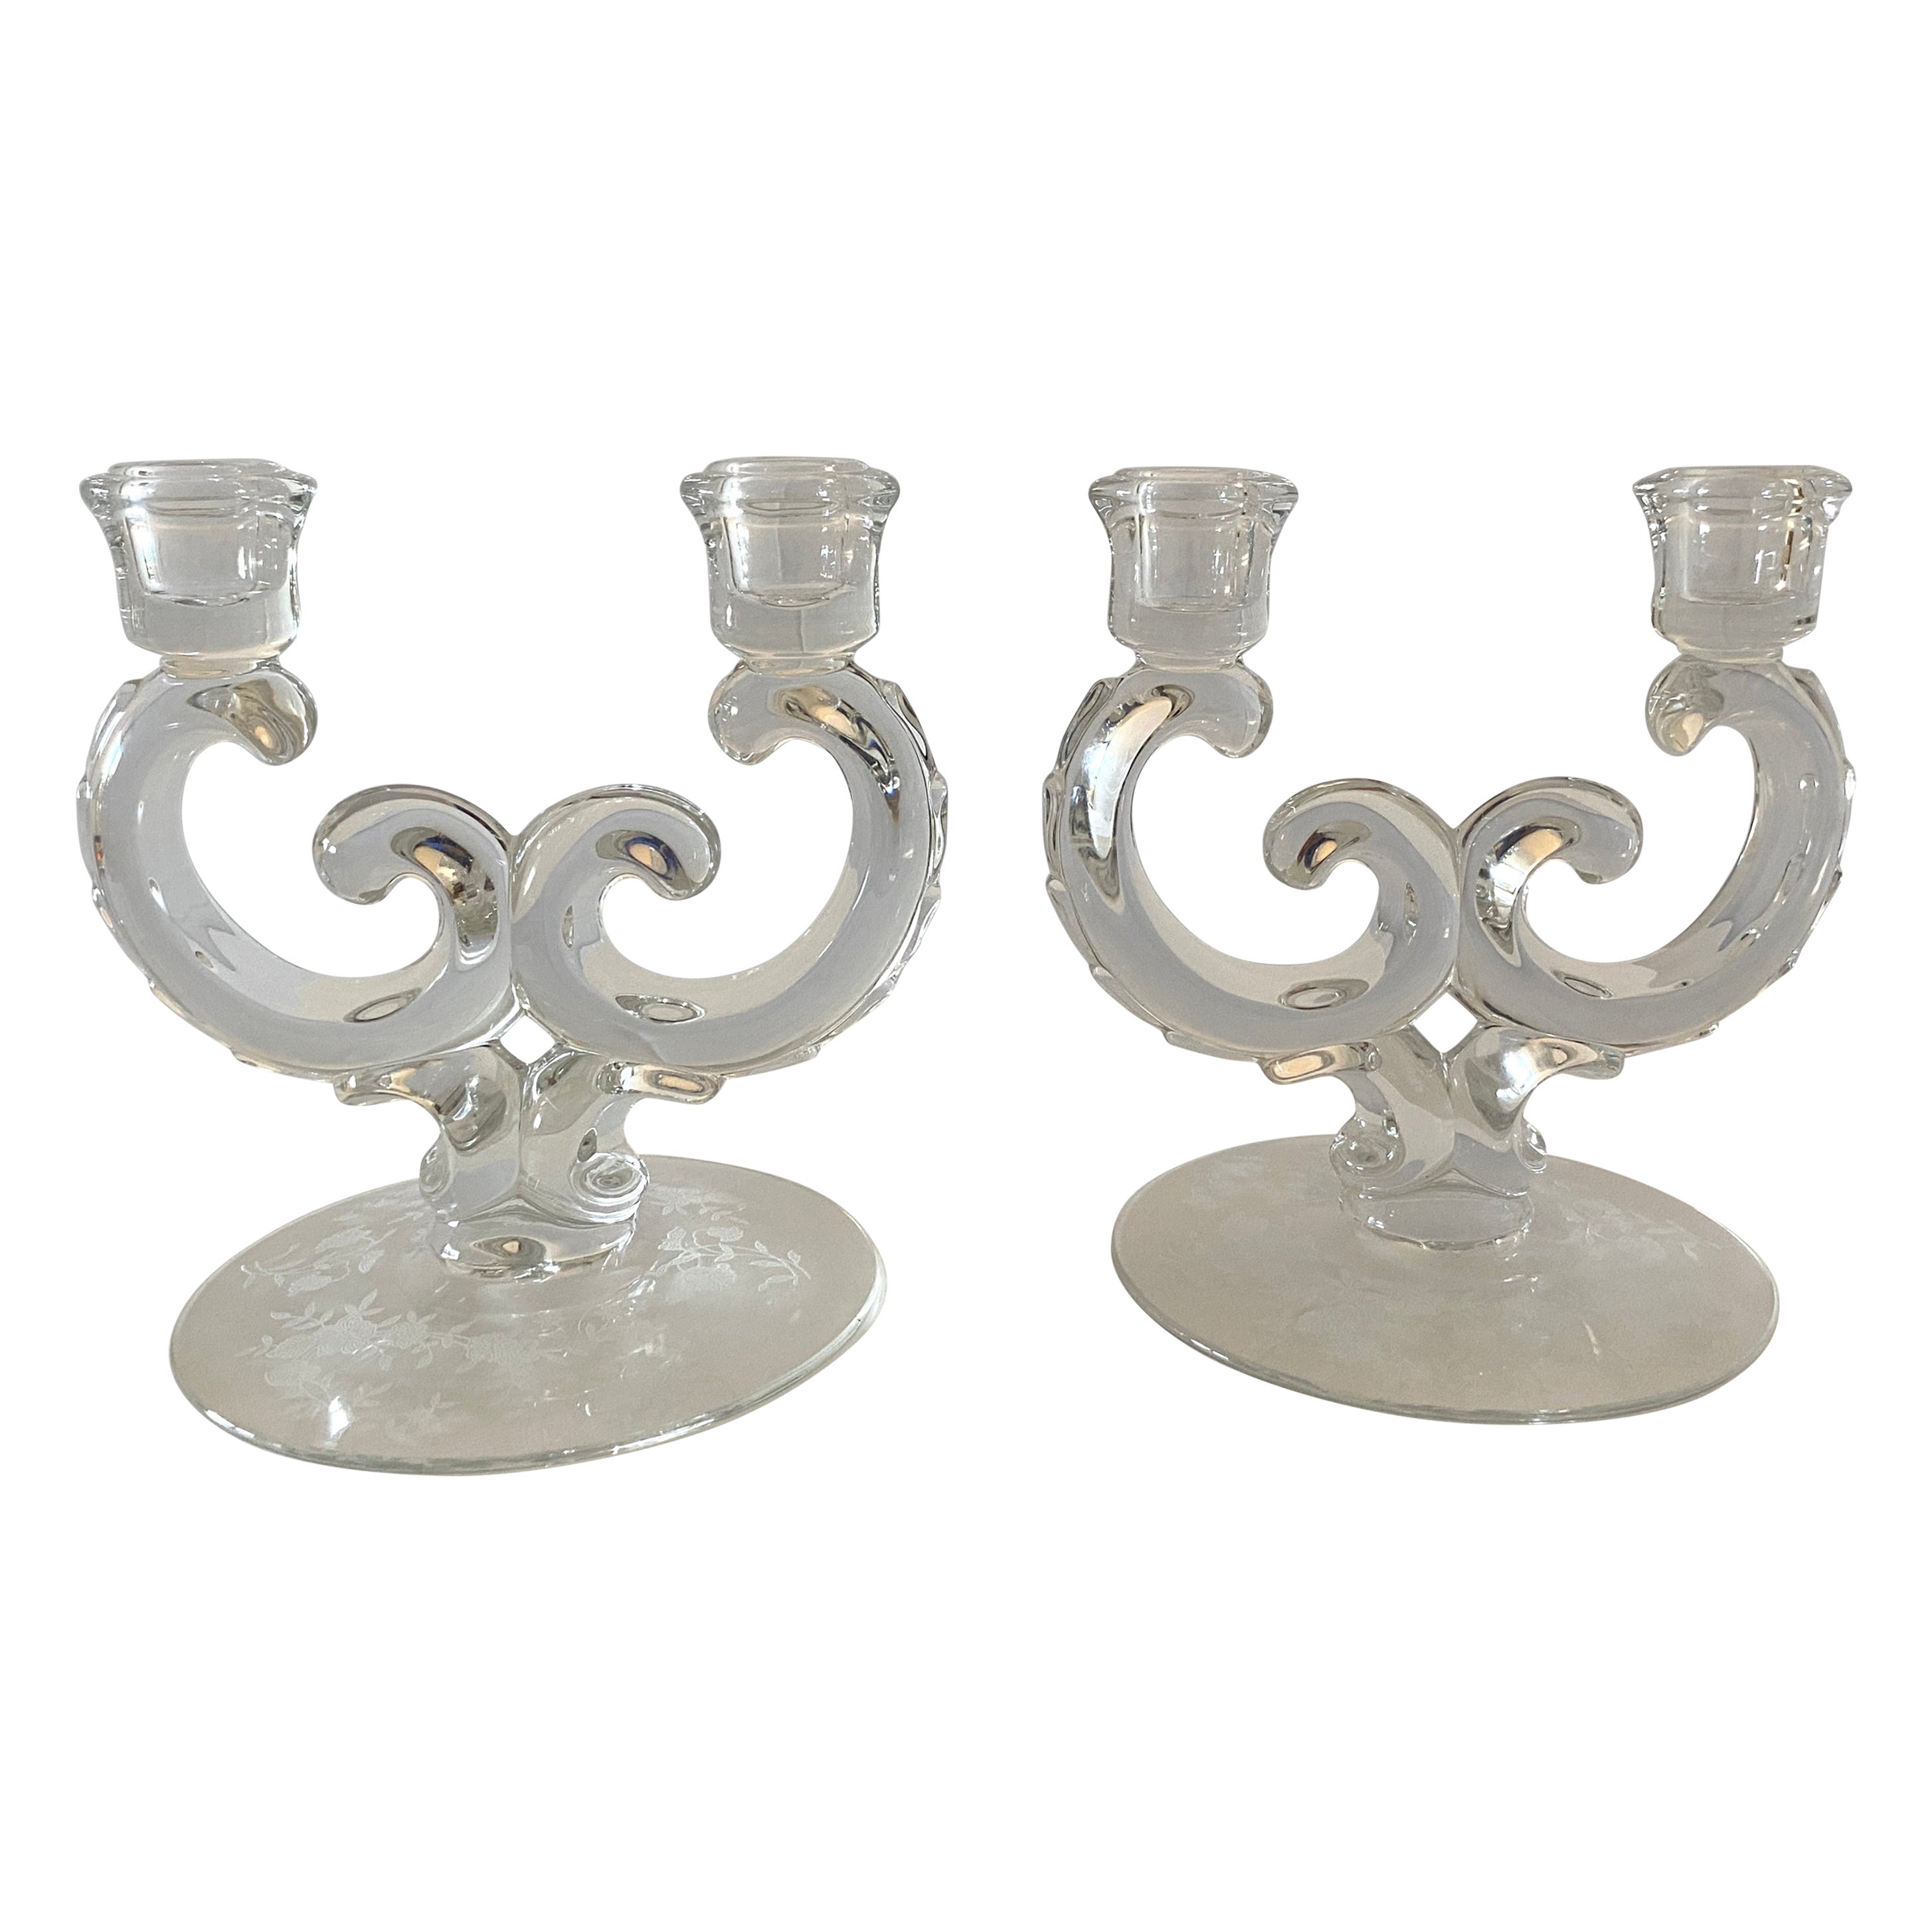 Pair of Modernist Sculpted Glass Candleholders with Etched Circular Base